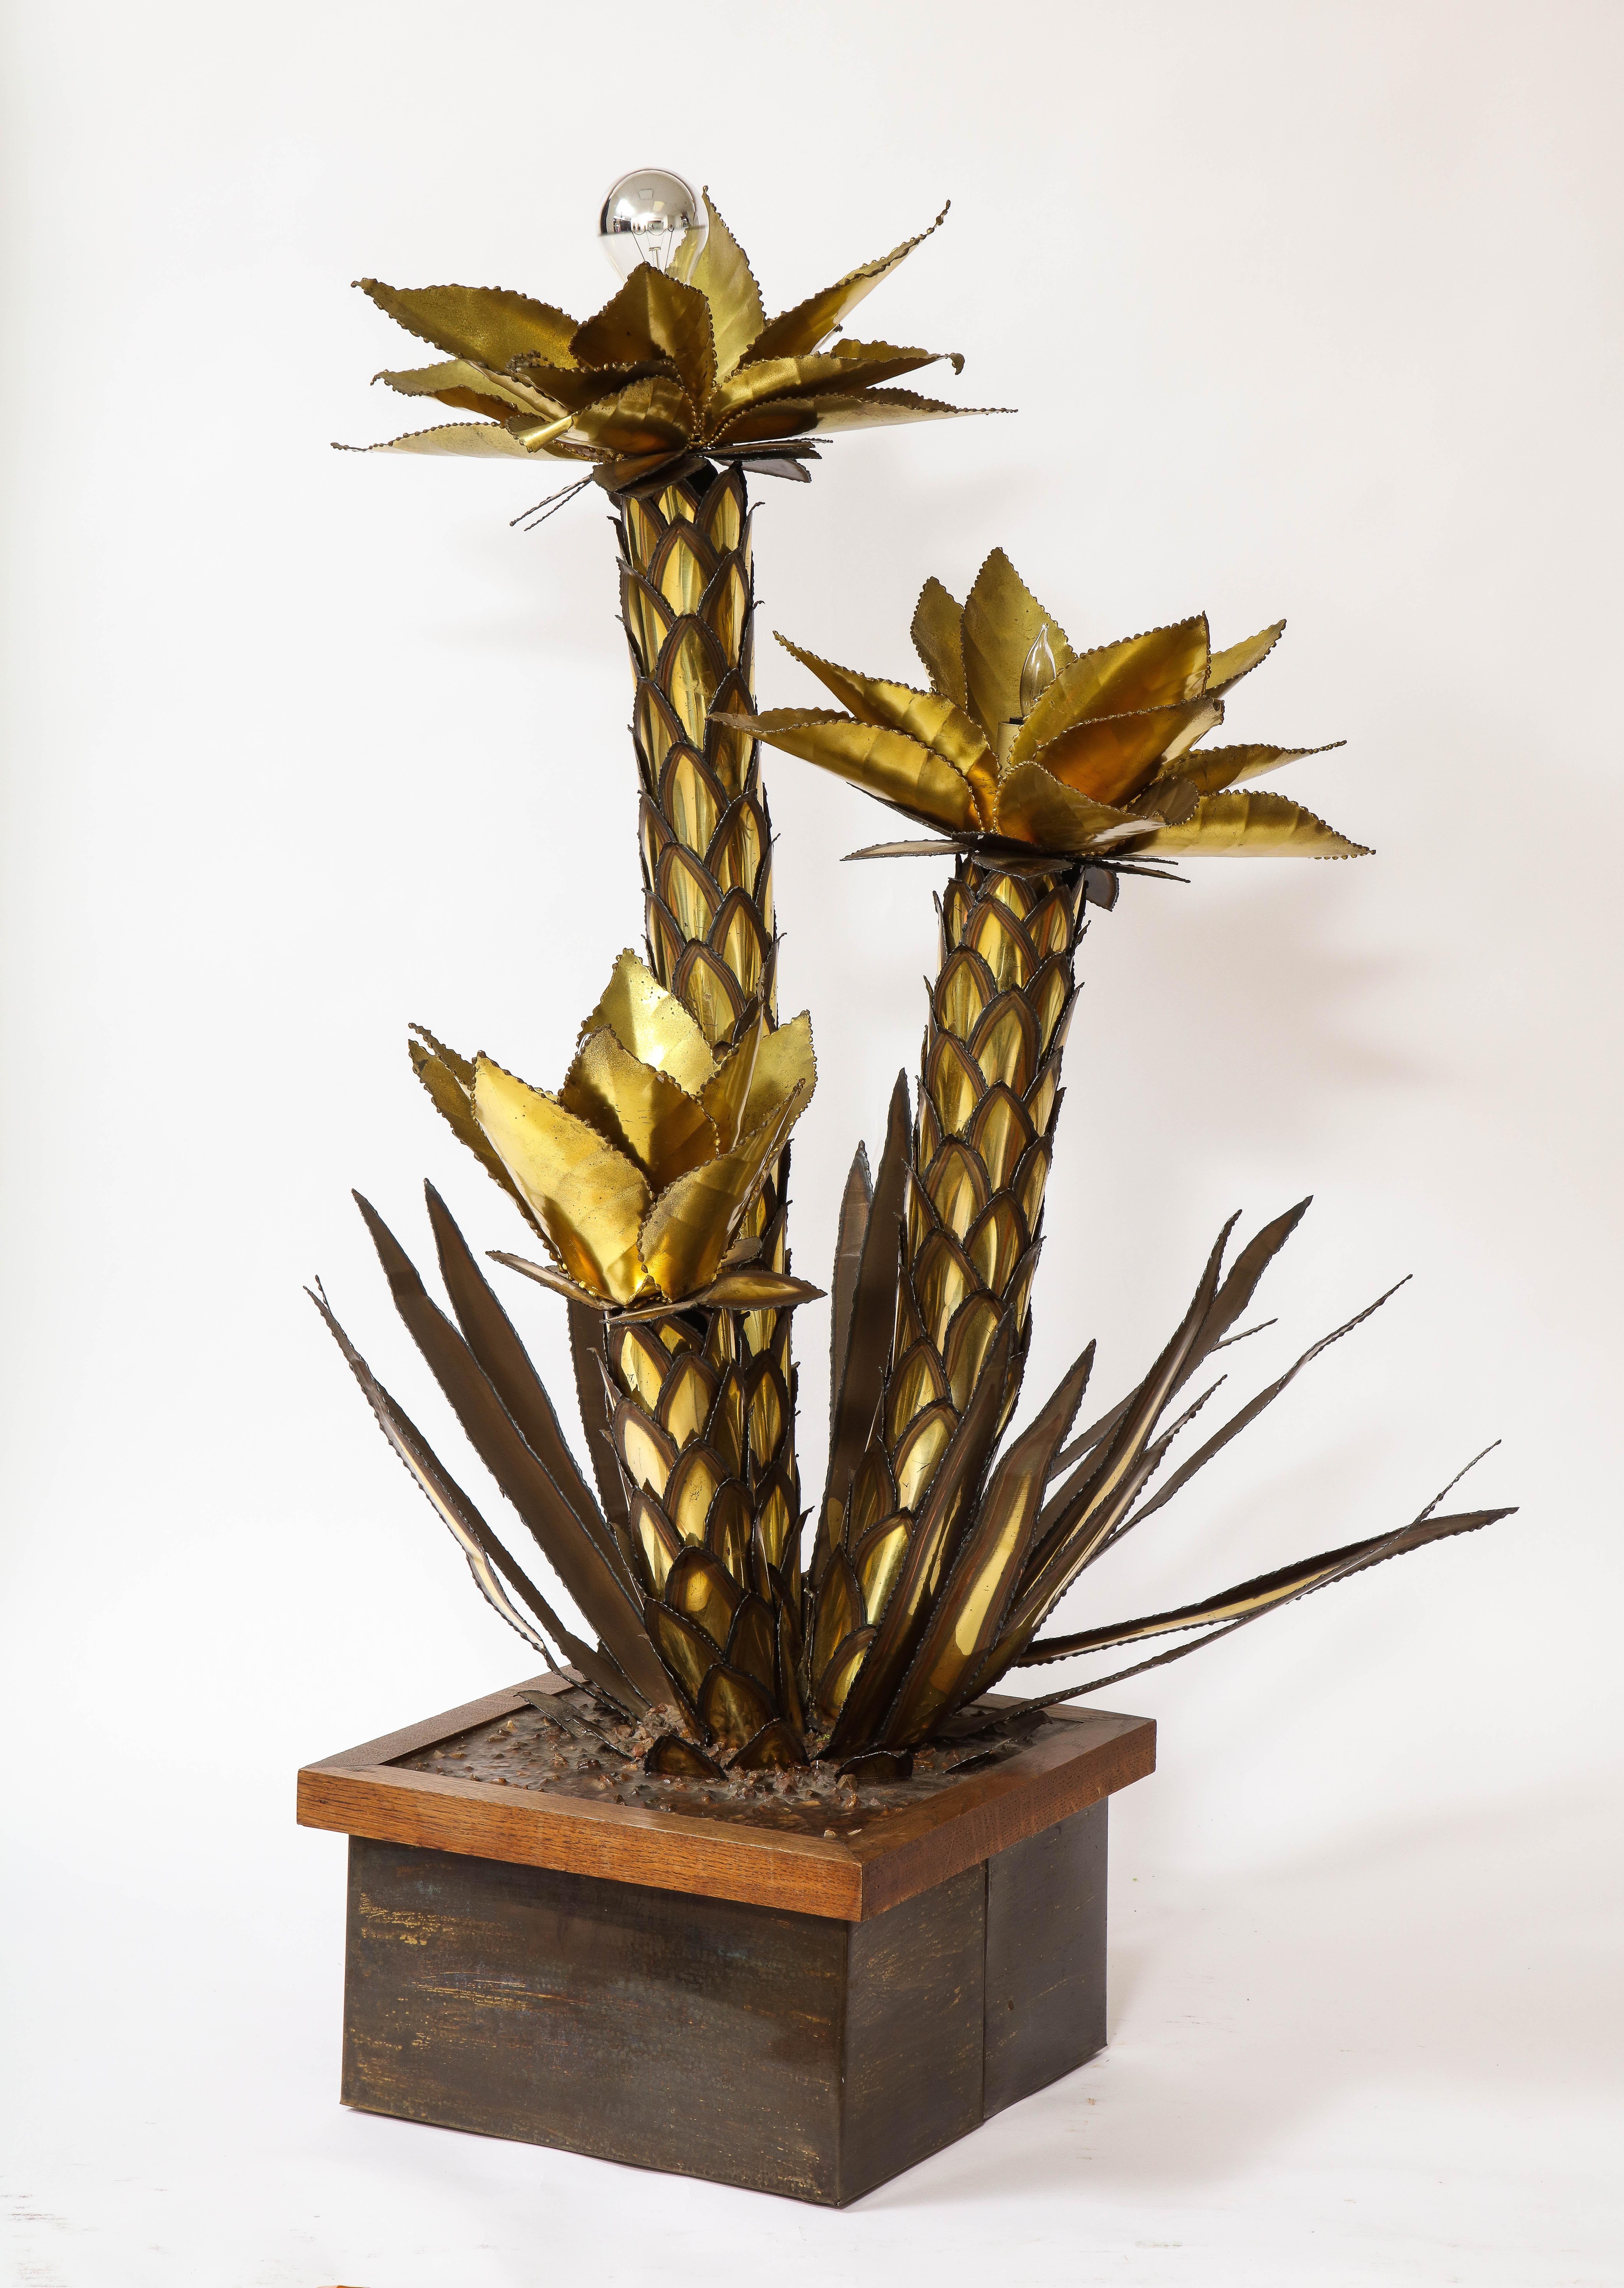 A Mid-Century Modern Group of Patinated and gilt metal palm tree form lamps by Maison Jansen. A large Maison Jansen palm tree table lamp in Hollywood regency style. The gilt and patinated colored leaves of the palm trees reflect a warm atmosphere in